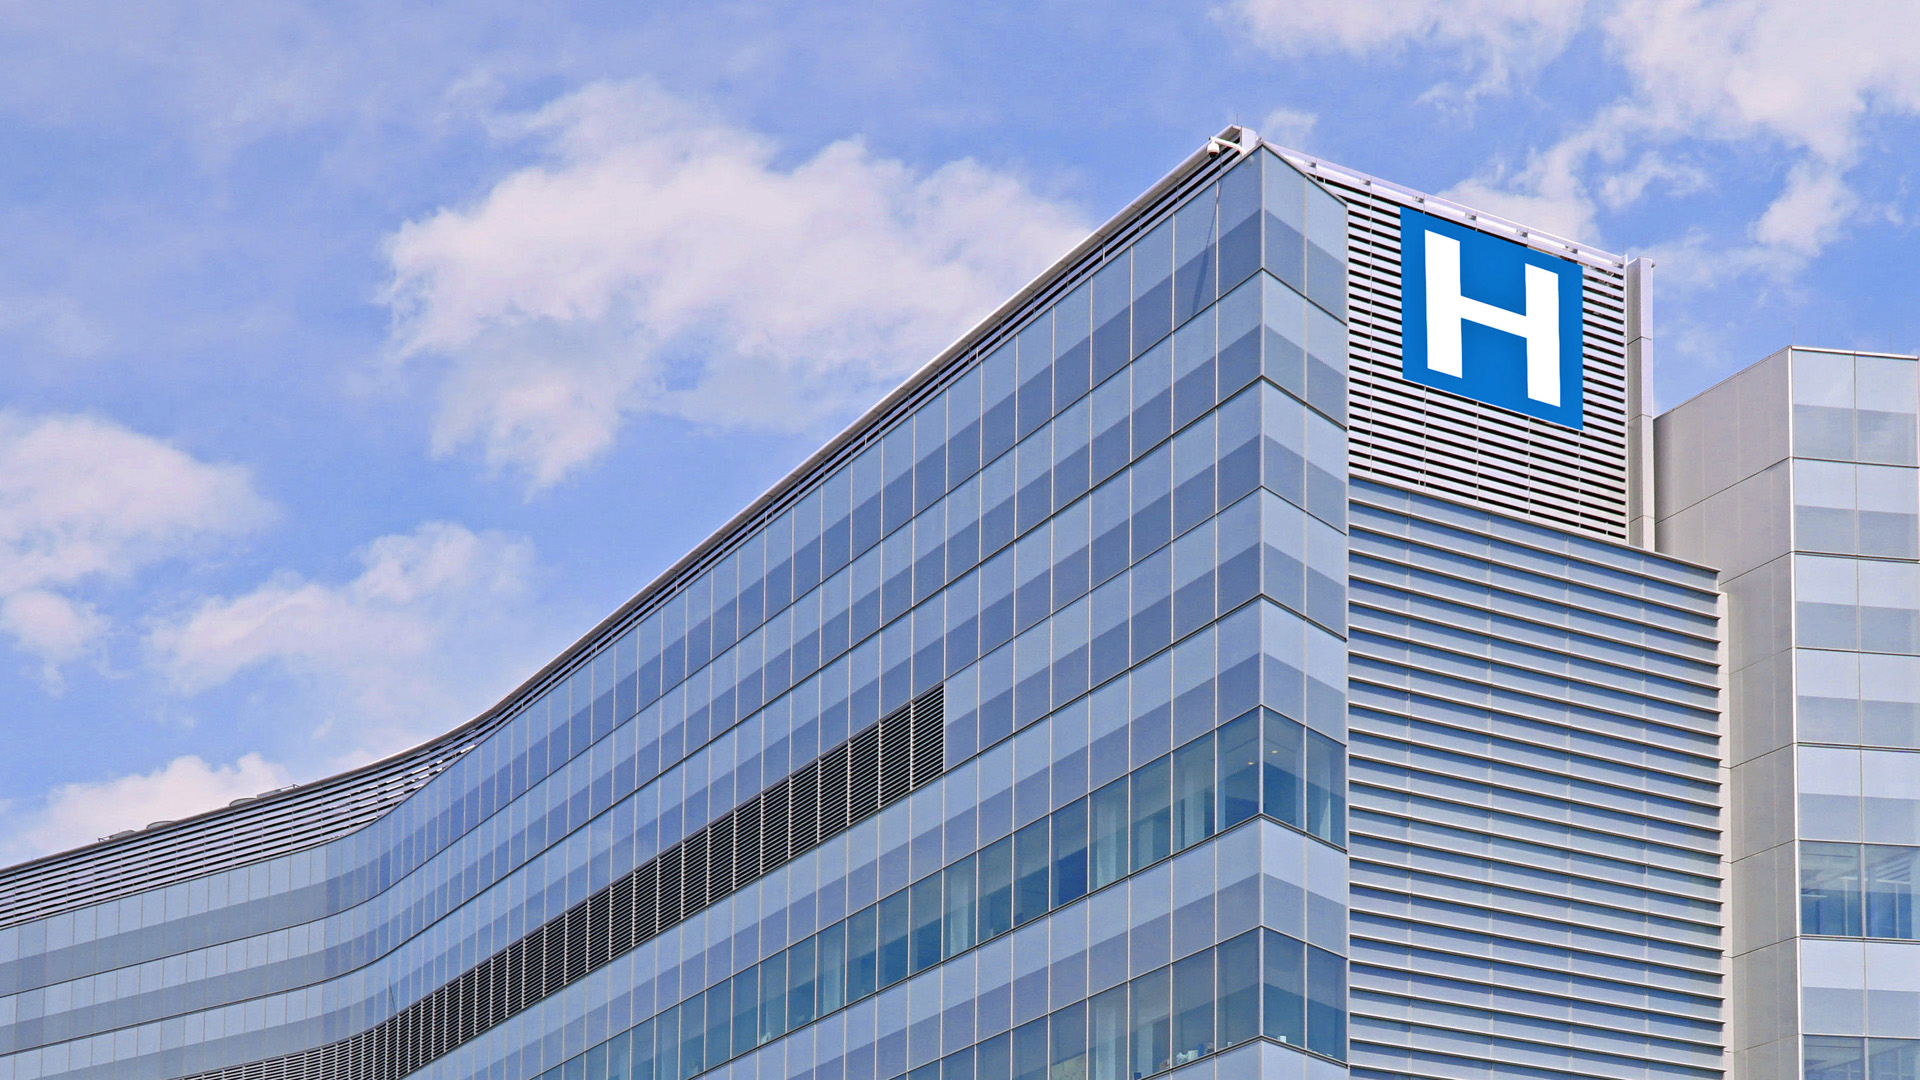 Texas hospital district emerges from bankruptcy through innovative restructuring